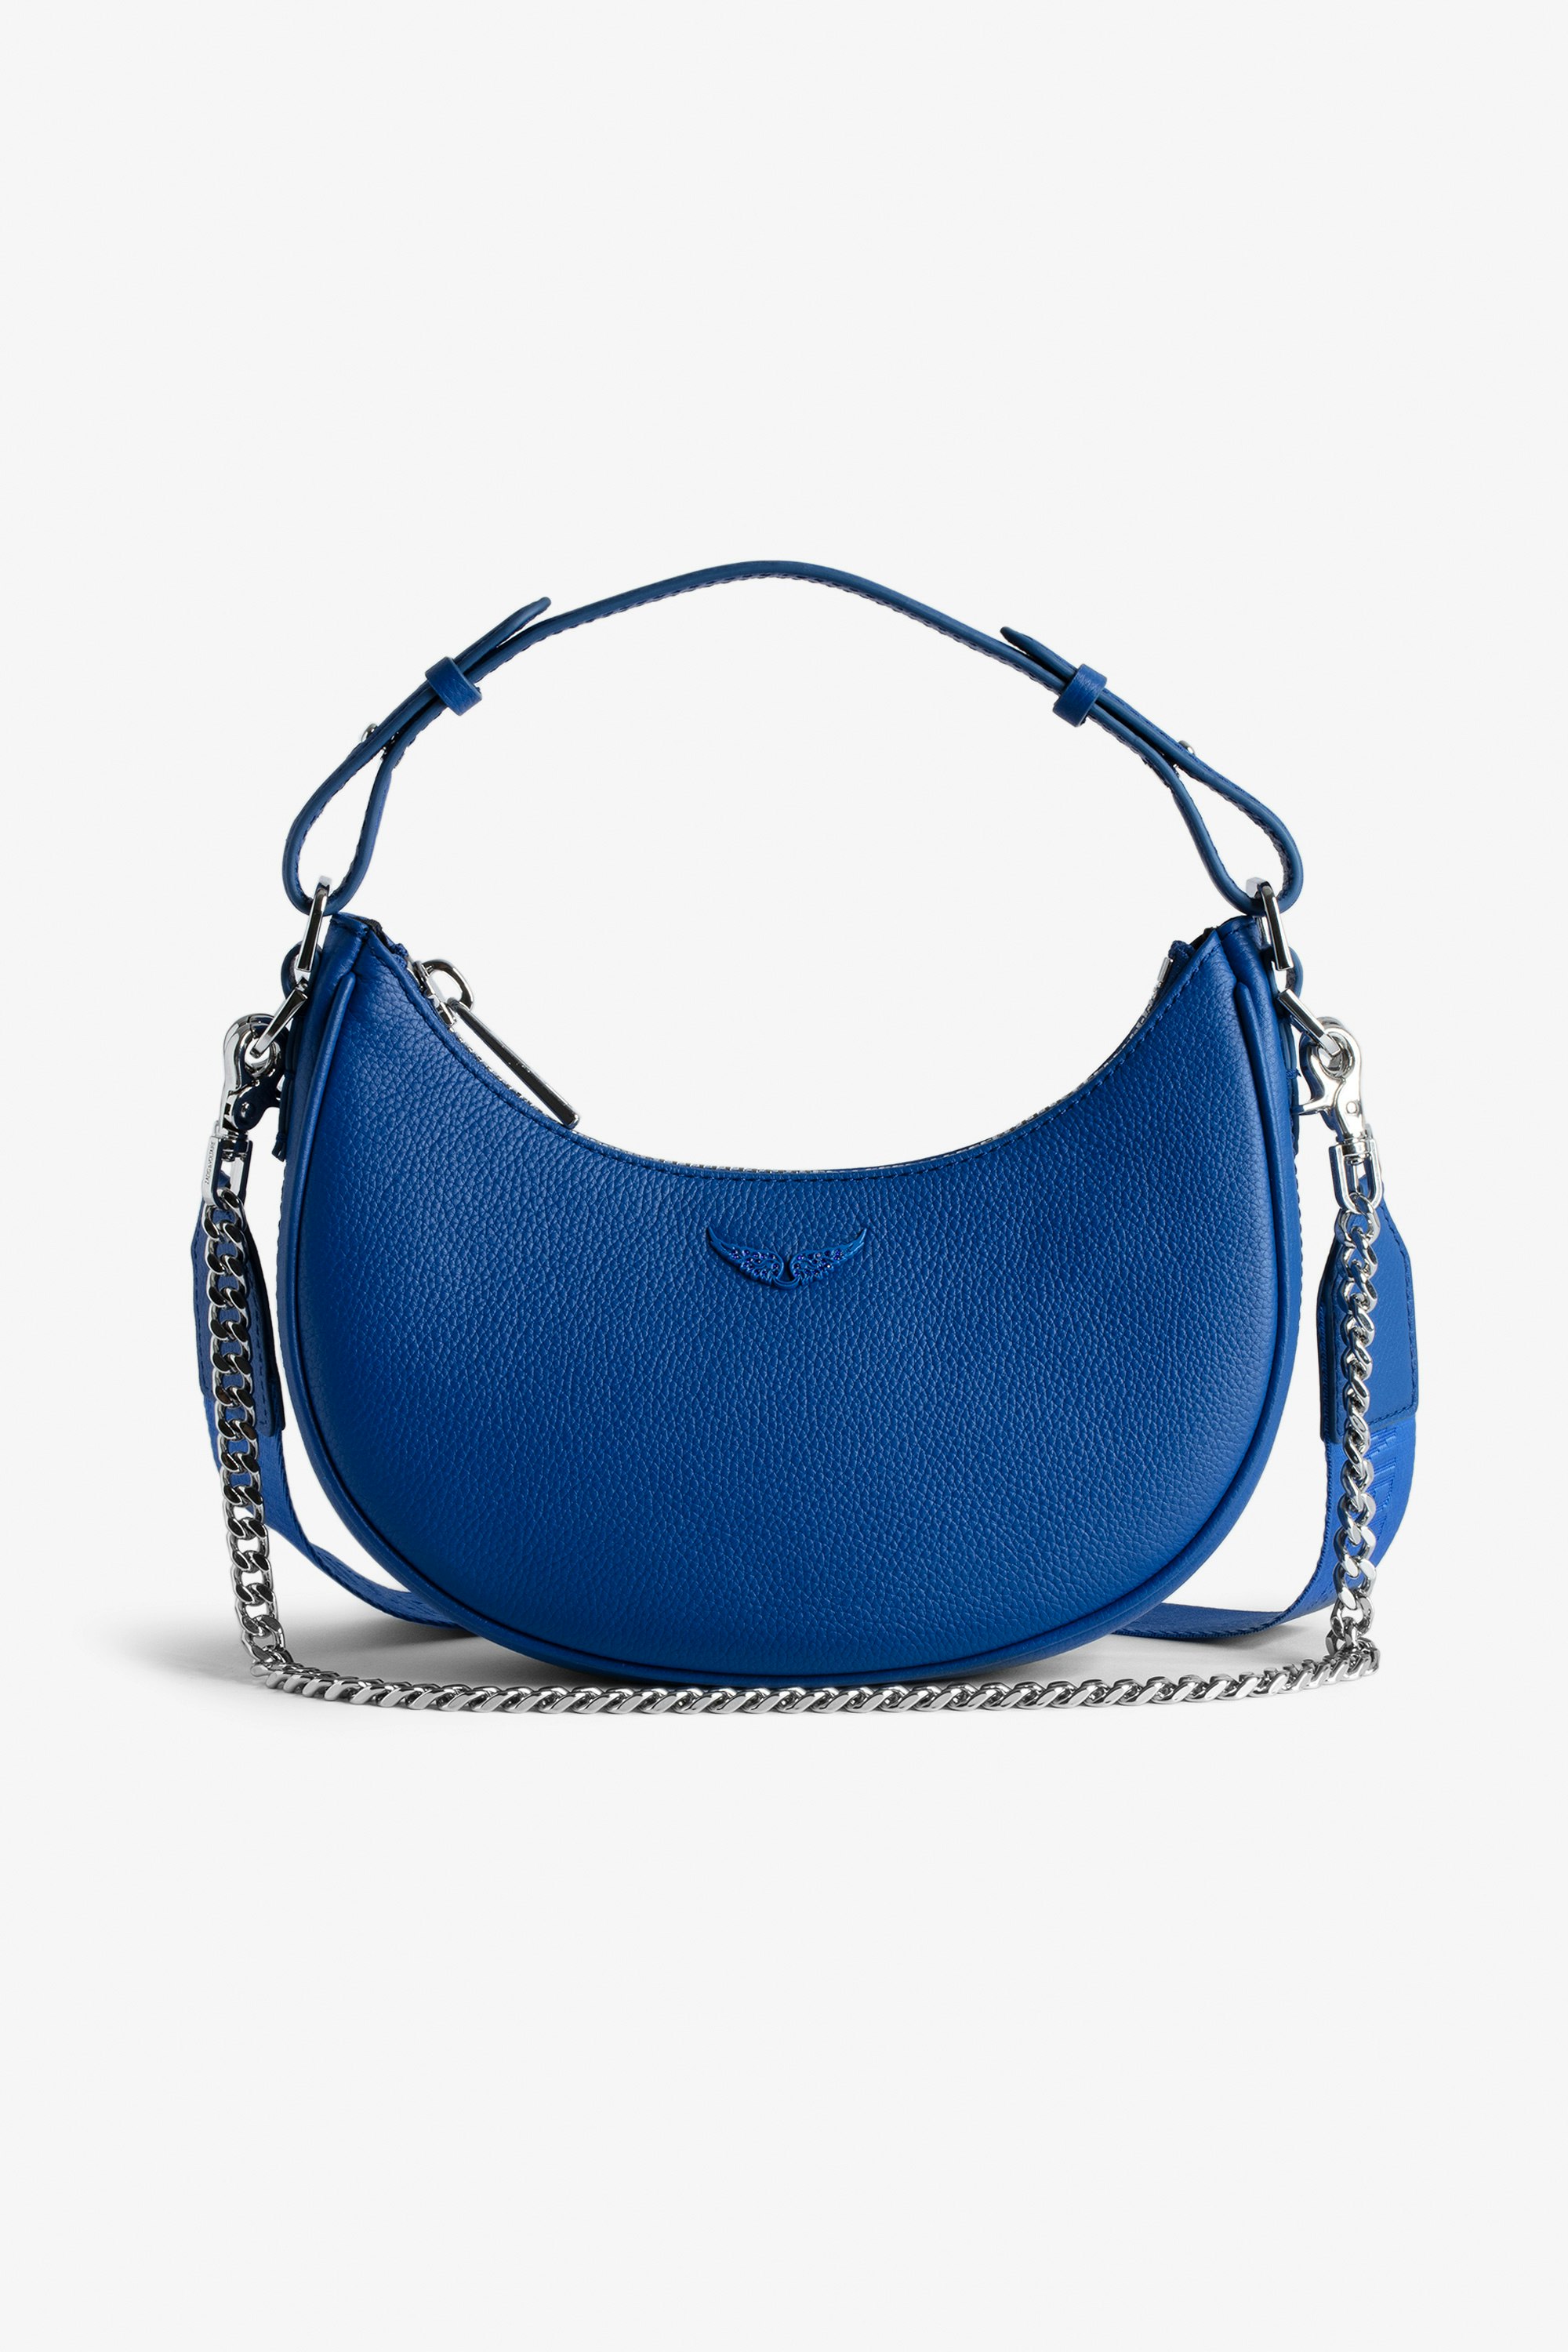 Moonrock bag Women’s half-moon bag in blue grained leather with a short handle, shoulder strap, chain and signature wings.